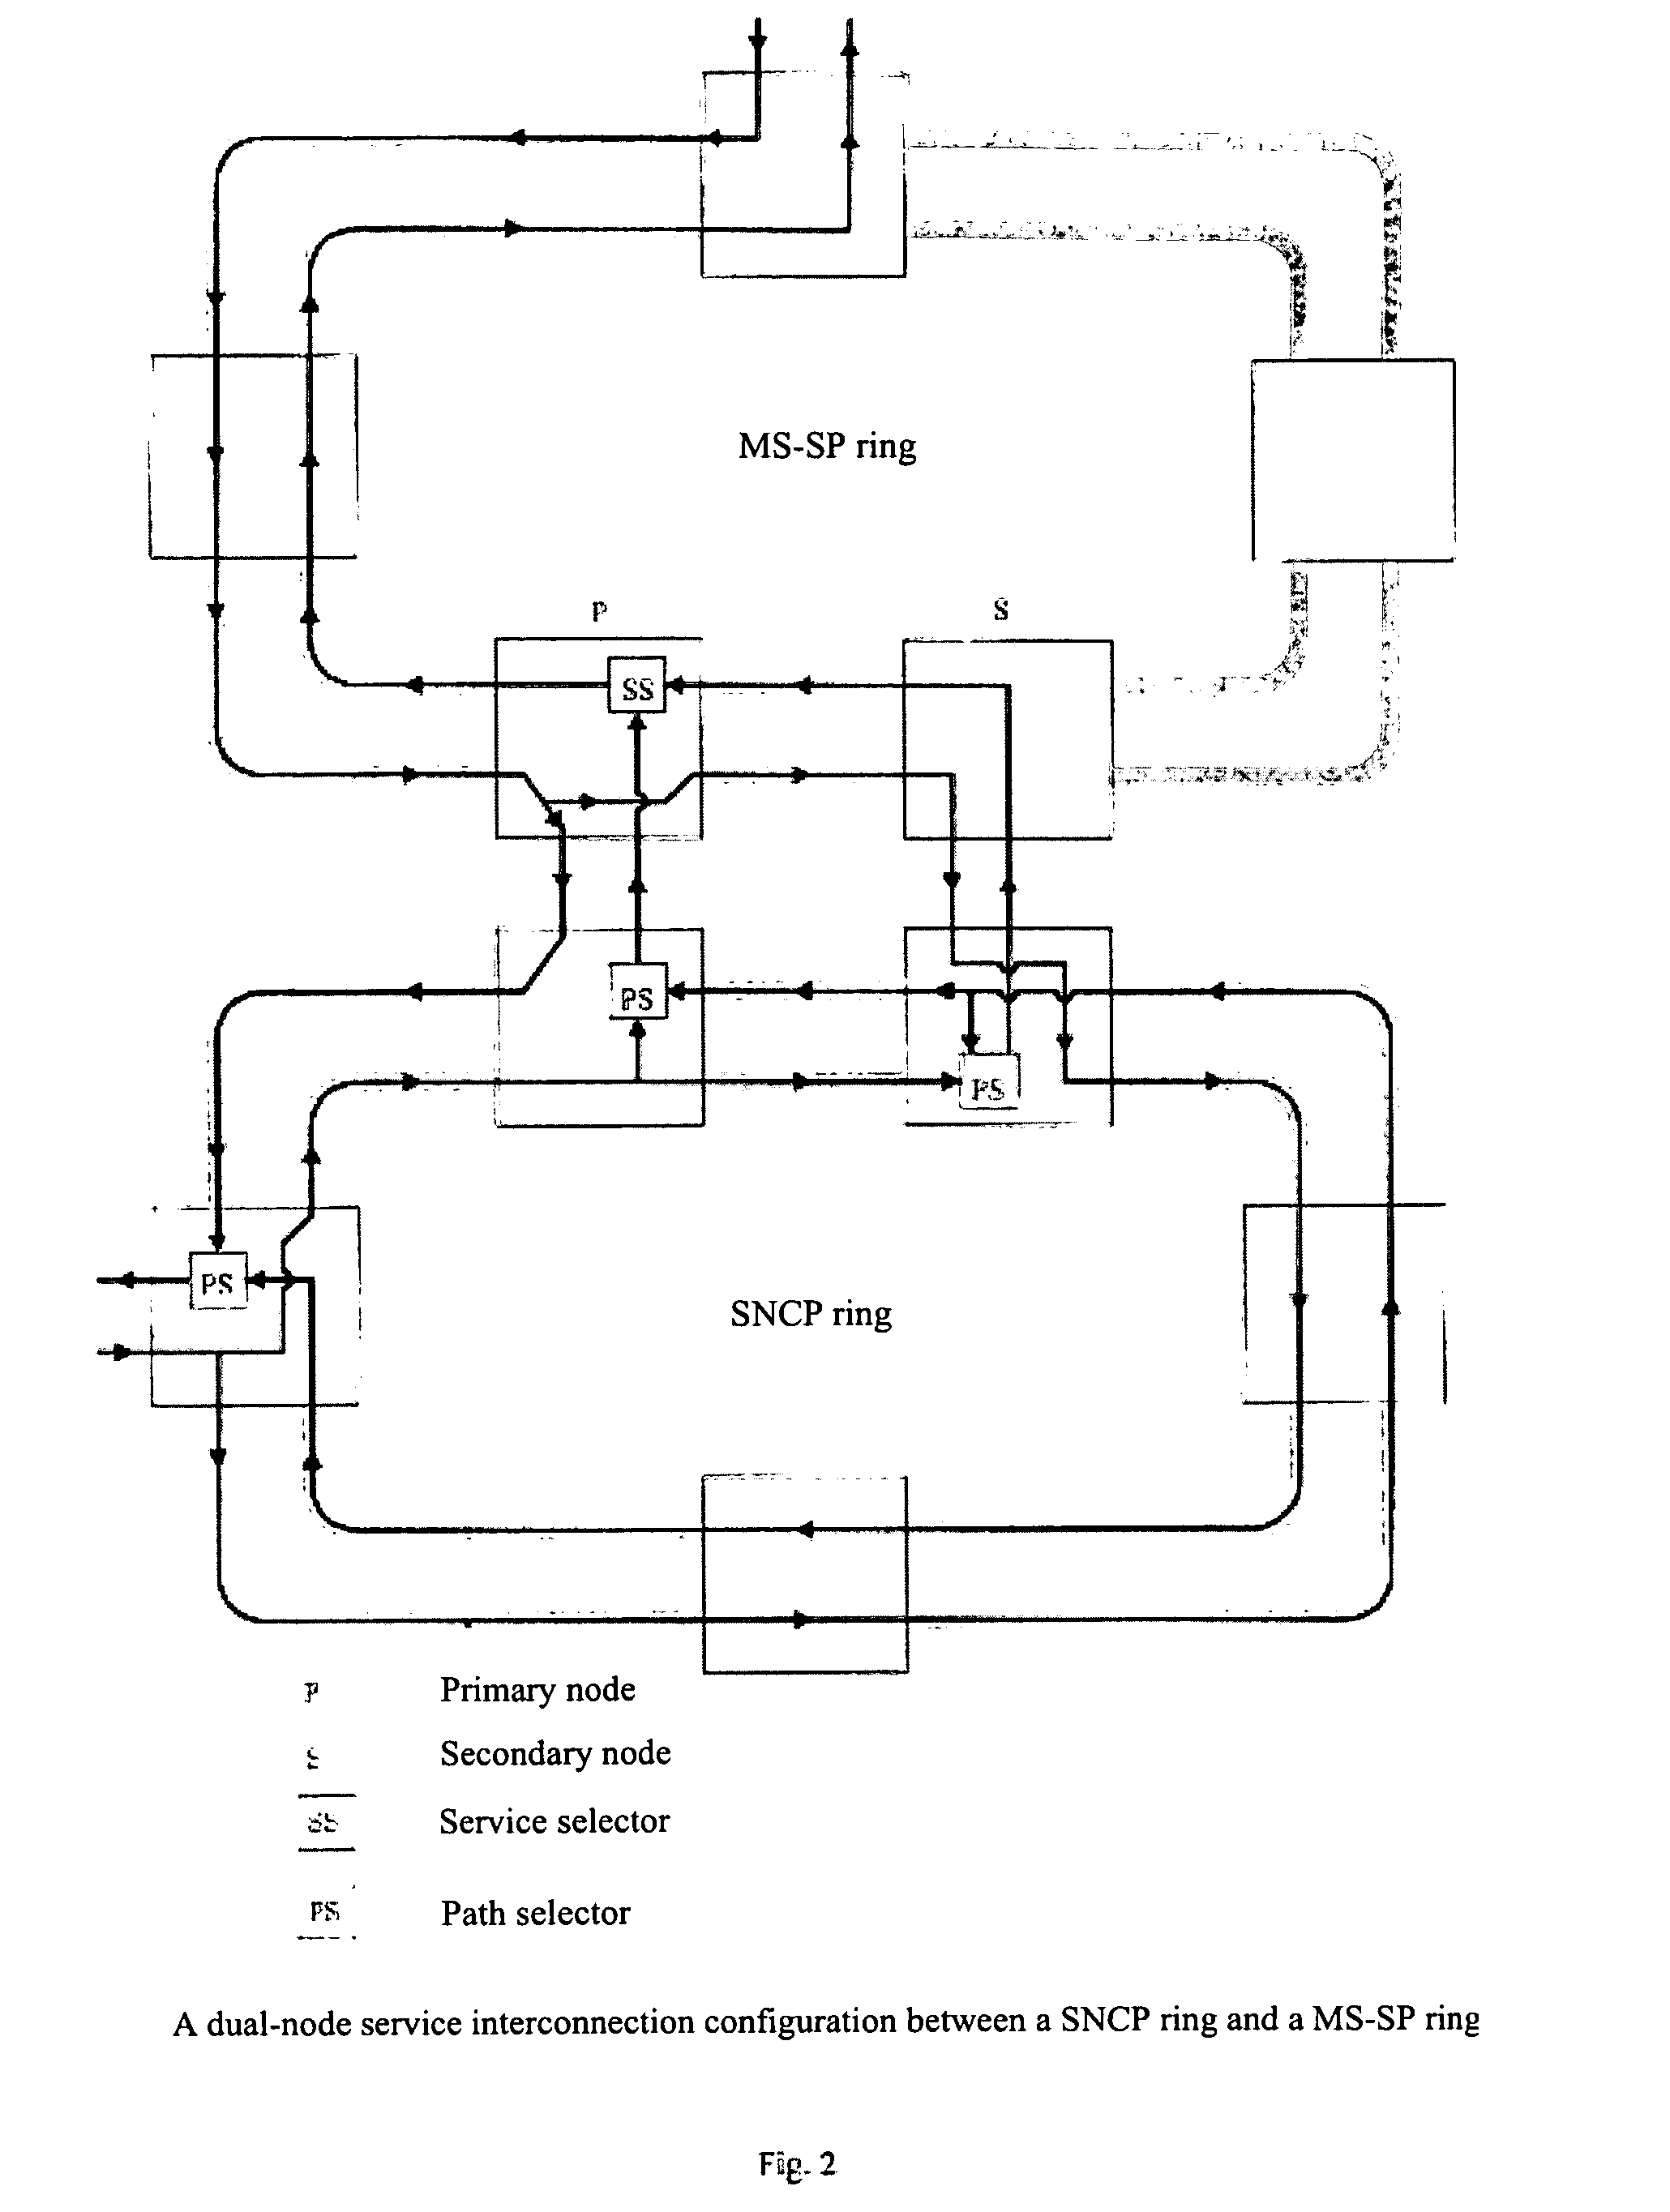 Exchange structure and a method of connection configuration between the optical networks